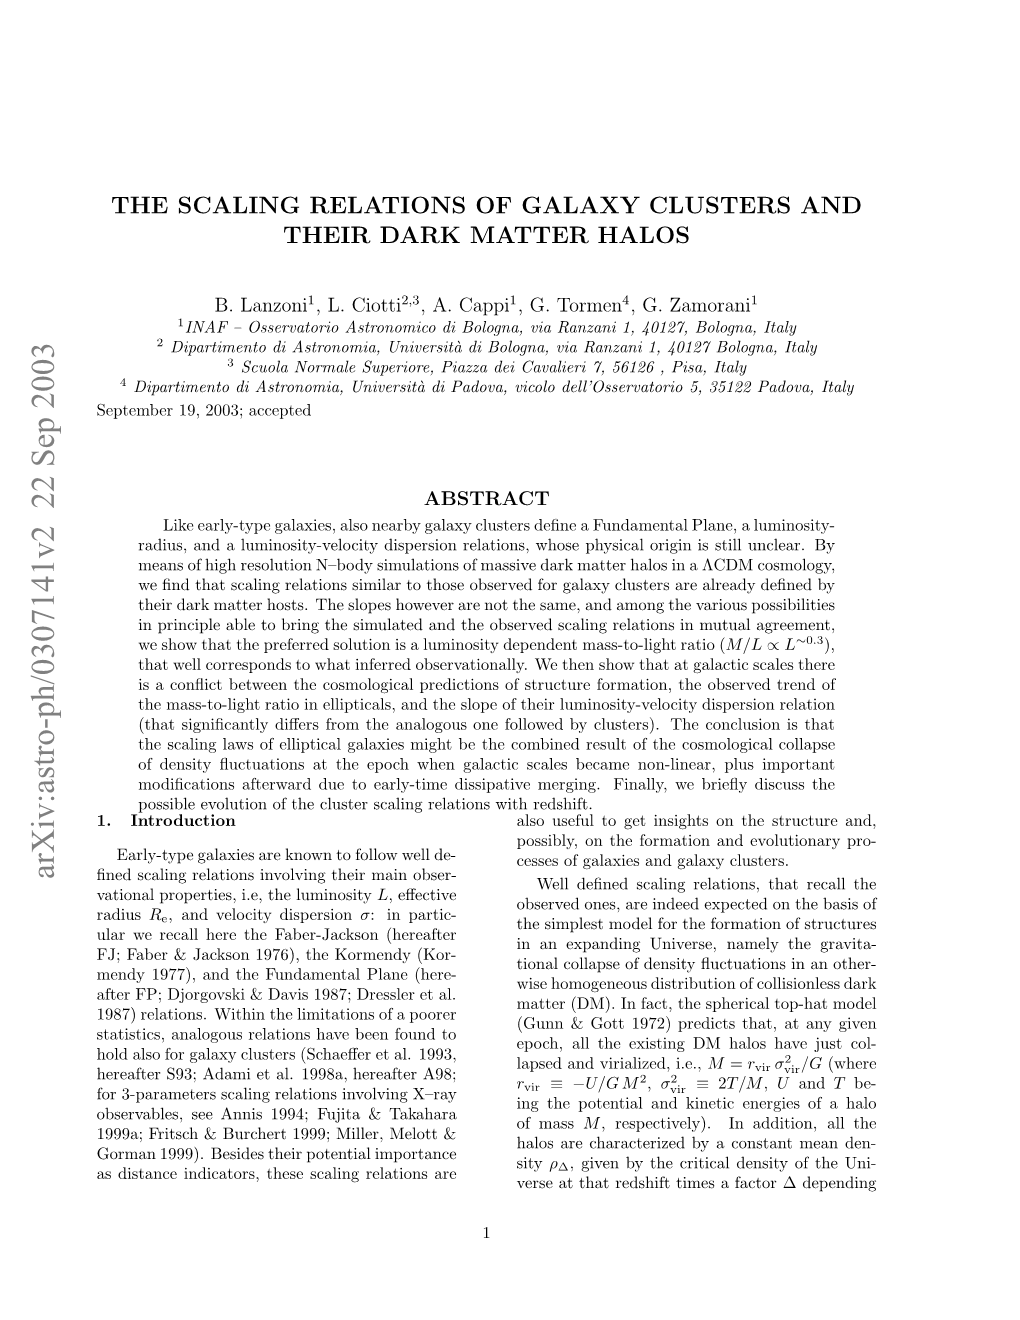 The Scaling Relations of Galaxy Clusters and Their Dark Matter Halos